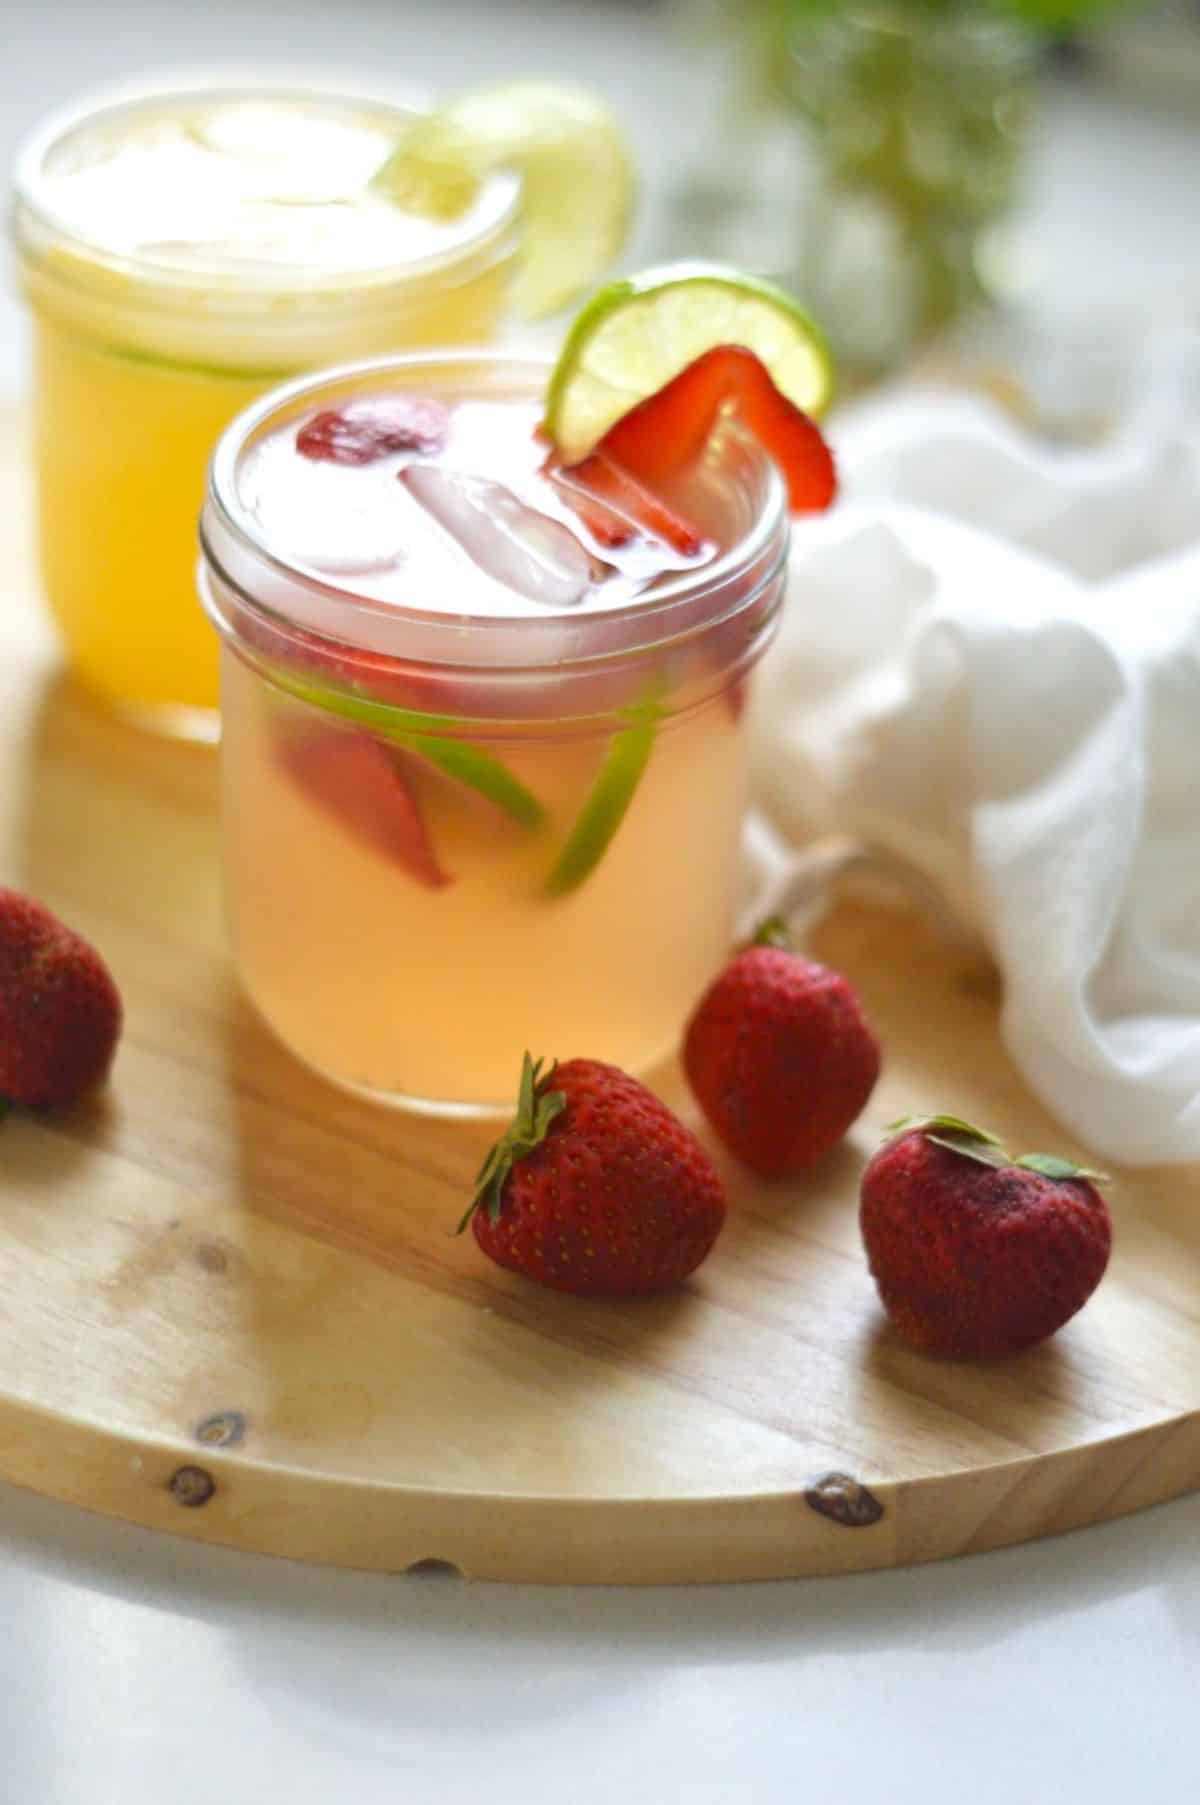 Homemade Water Kefir with fruits in a glass cup.